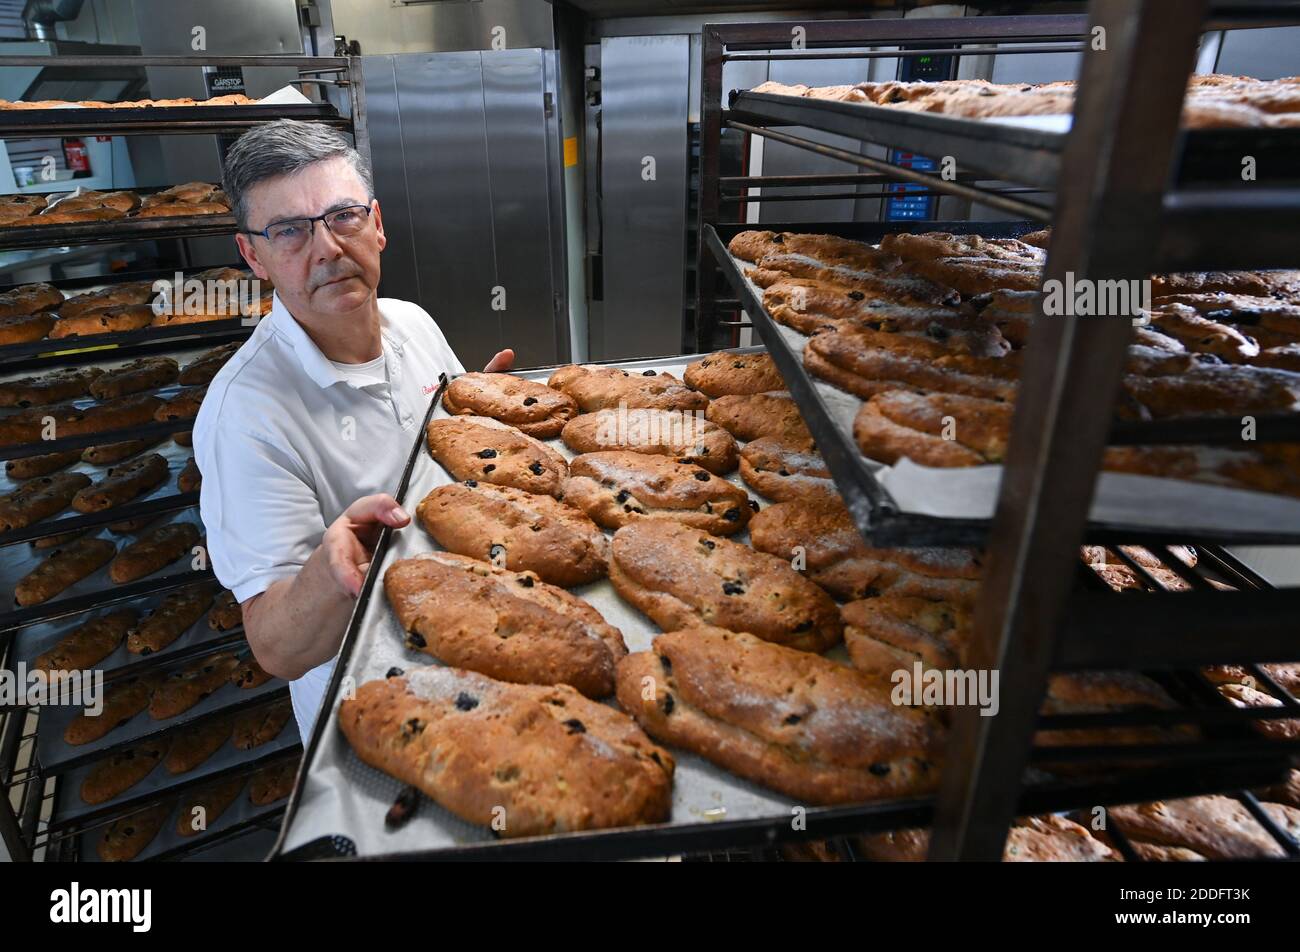 19 November 2020, Saxony-Anhalt, Klosterhäseler: Master baker Rolf Block transports freshly baked Naumburg Stollen in his bakery in Klosterhäseler. Around 5000 pieces of the traditional Christmas cake leave the bakery this year. The Corona pandemic is also having an effect here, so the café of the bakery and confectionery is currently closed, but the online shop is doing much better. The special feature of his Naumburg Stollen are the dried and kirsch-soaked sweet cherries, which are added to the dough in place of the sultanas. Photo: Hendrik Schmidt/dpa-Zentralbild/ZB Stock Photo